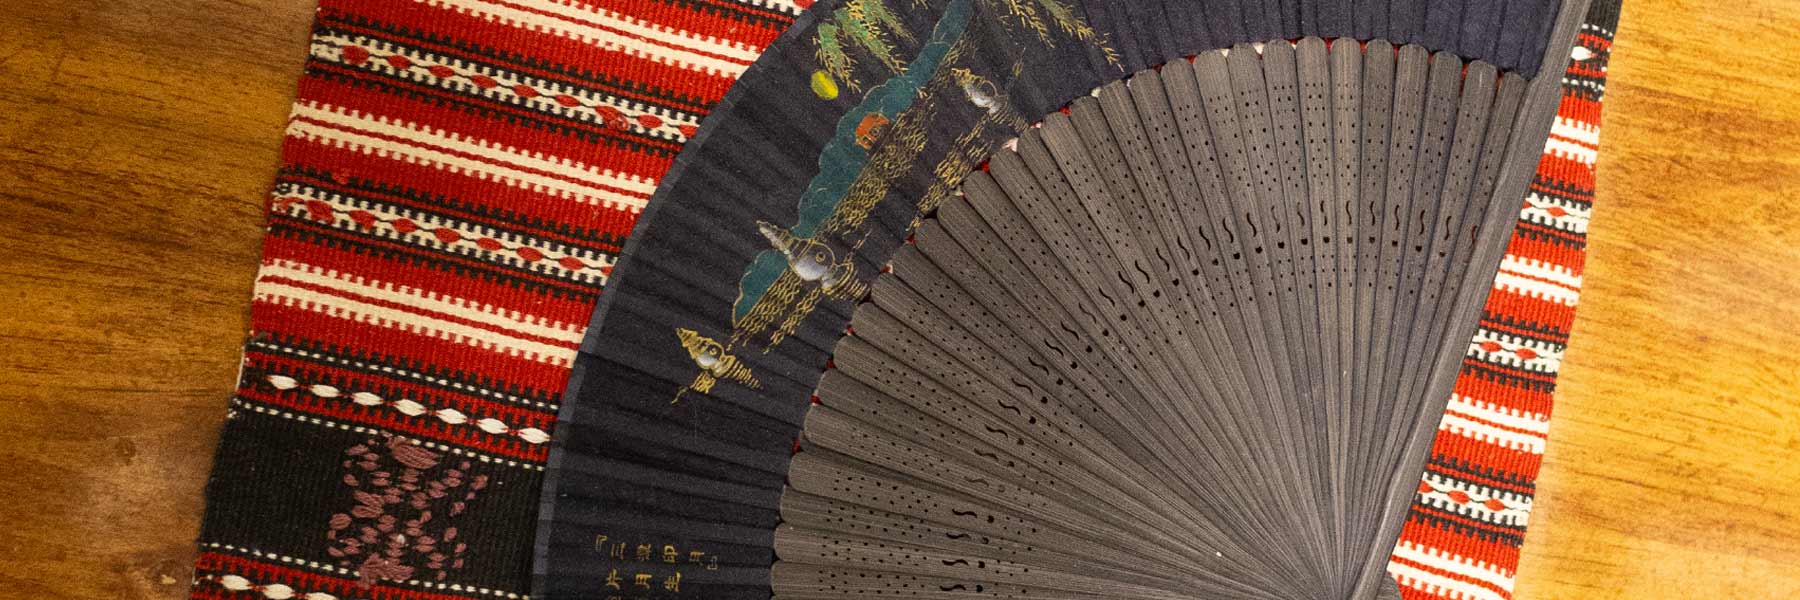 A delicately carved ornamental fan lies on top of a South American textile at the Ostrom Workshop, creating a pleasing textural contrast. 